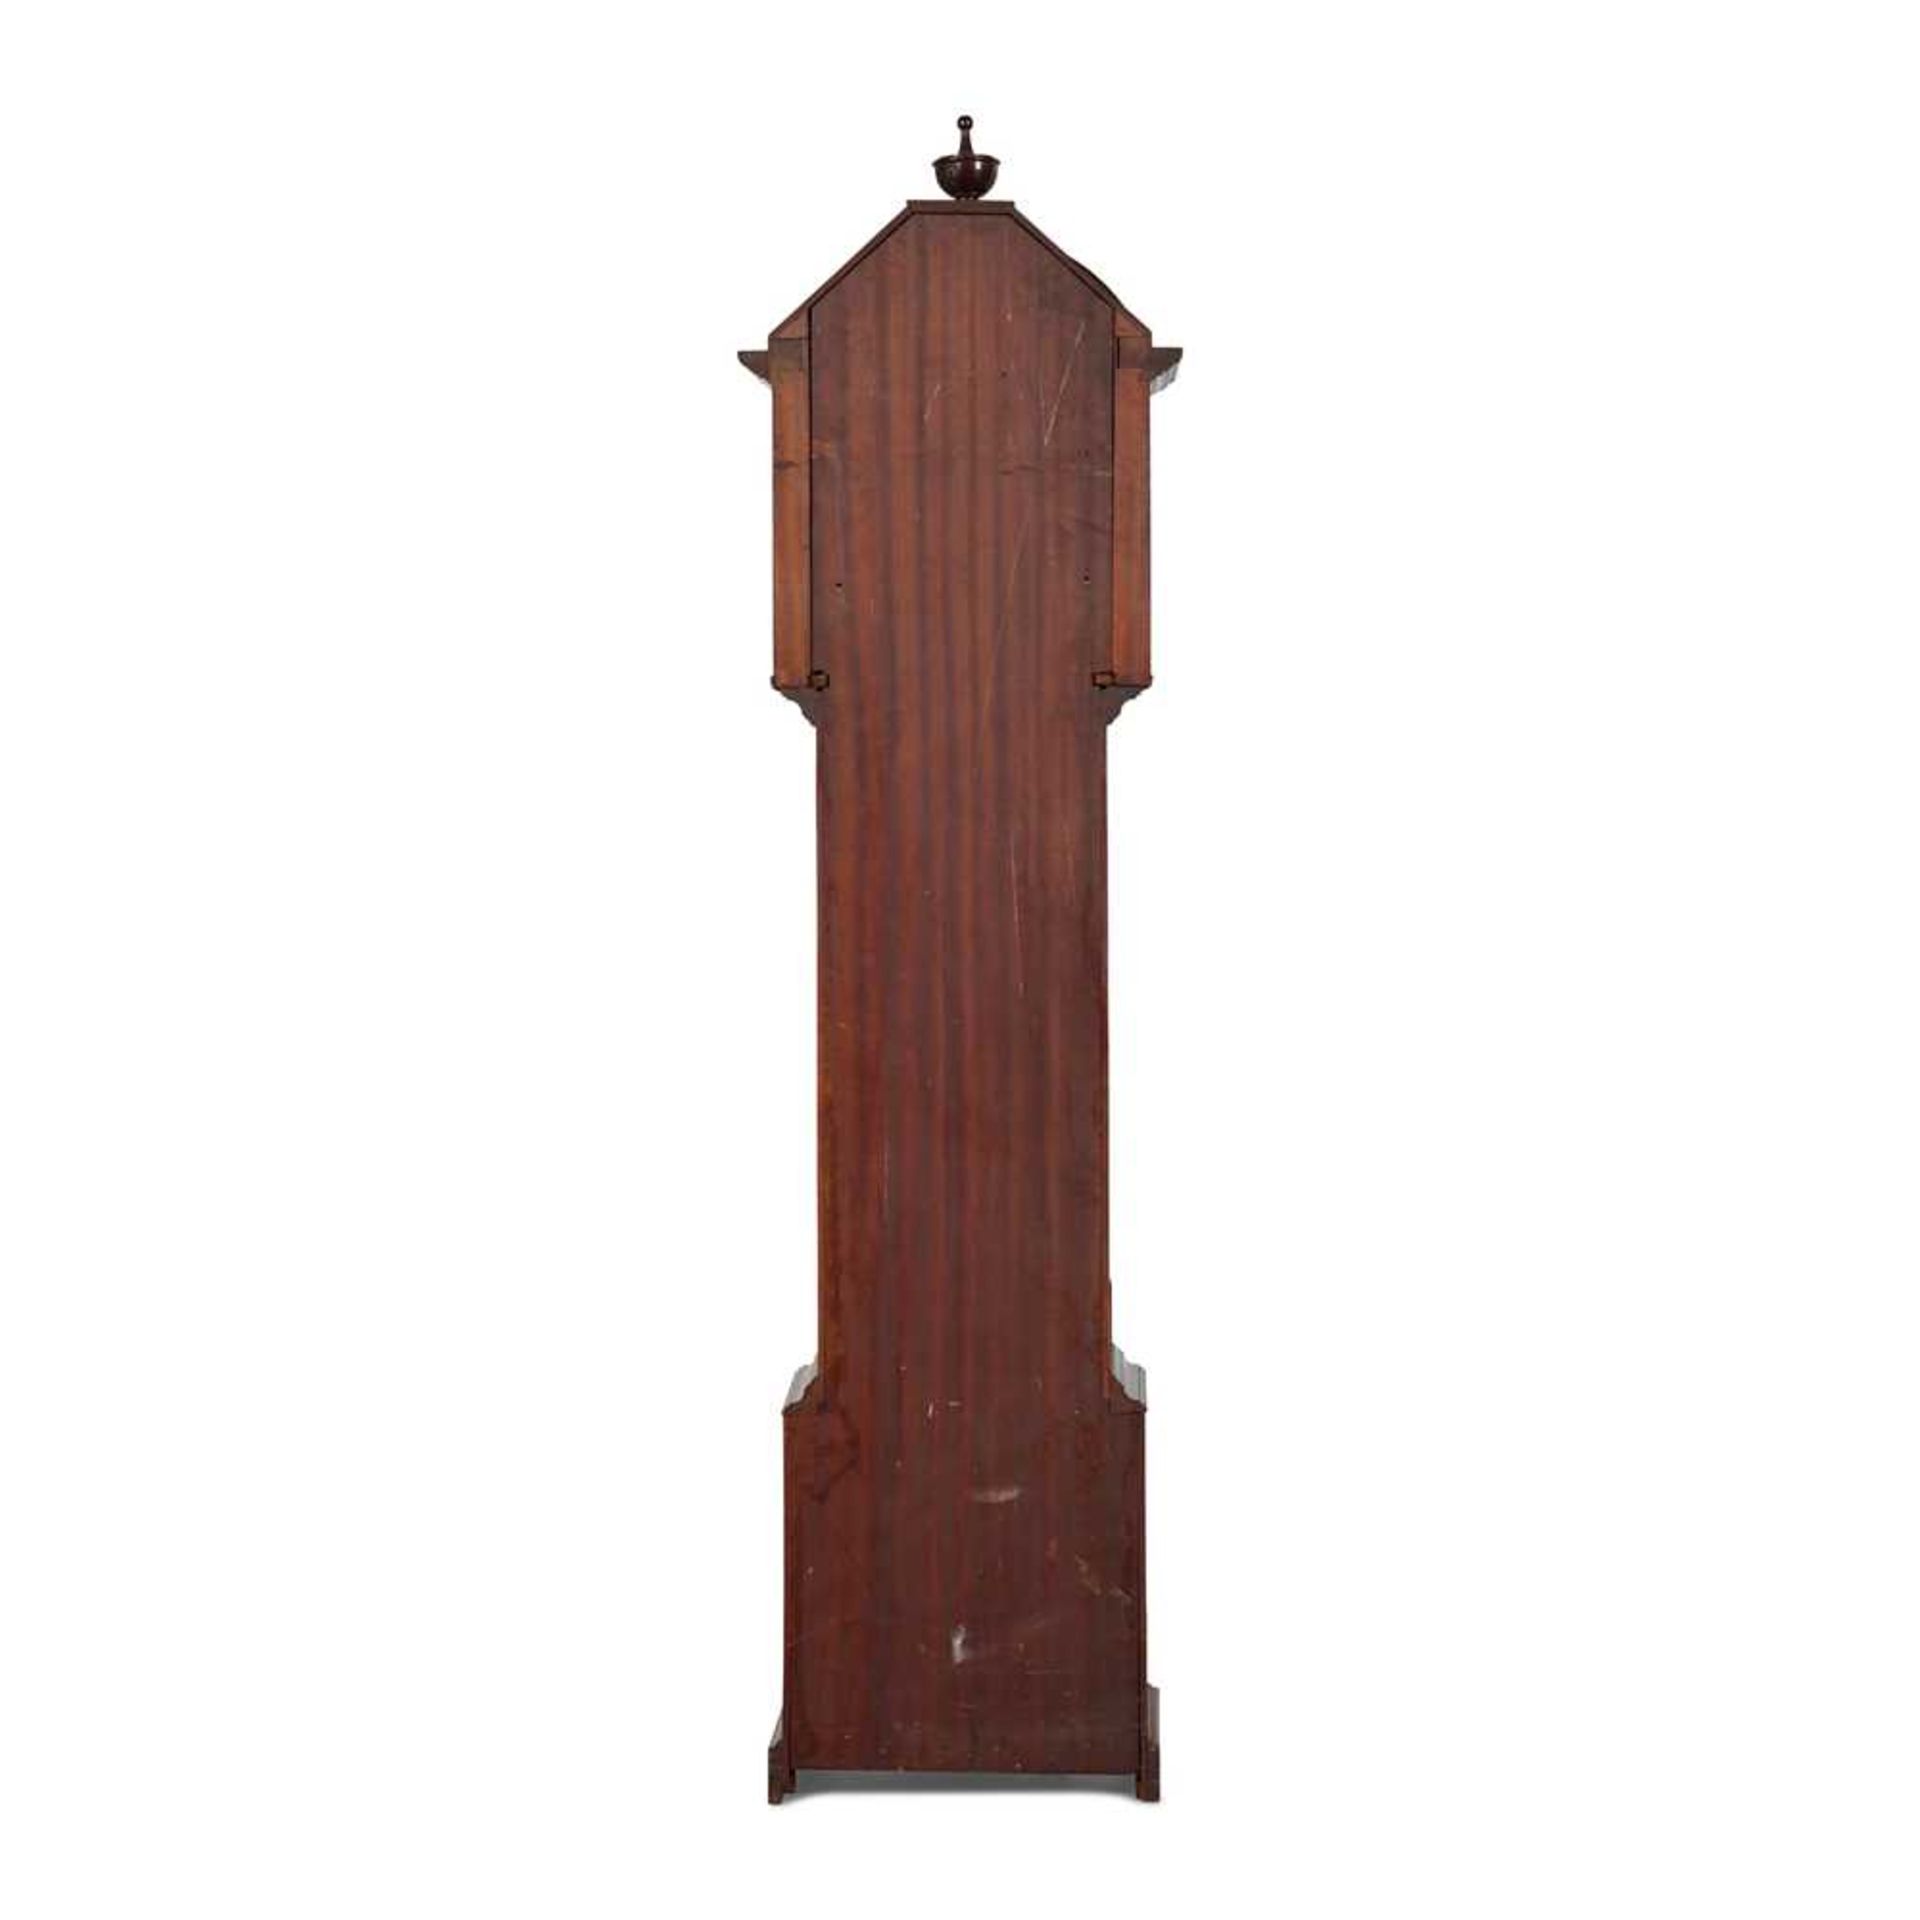 LATE VICTORIAN CHIMING LONGCASE CLOCK, W.F. EVANS & SONS, HANDSWORTH LATE 19TH CENTURY - Image 3 of 3